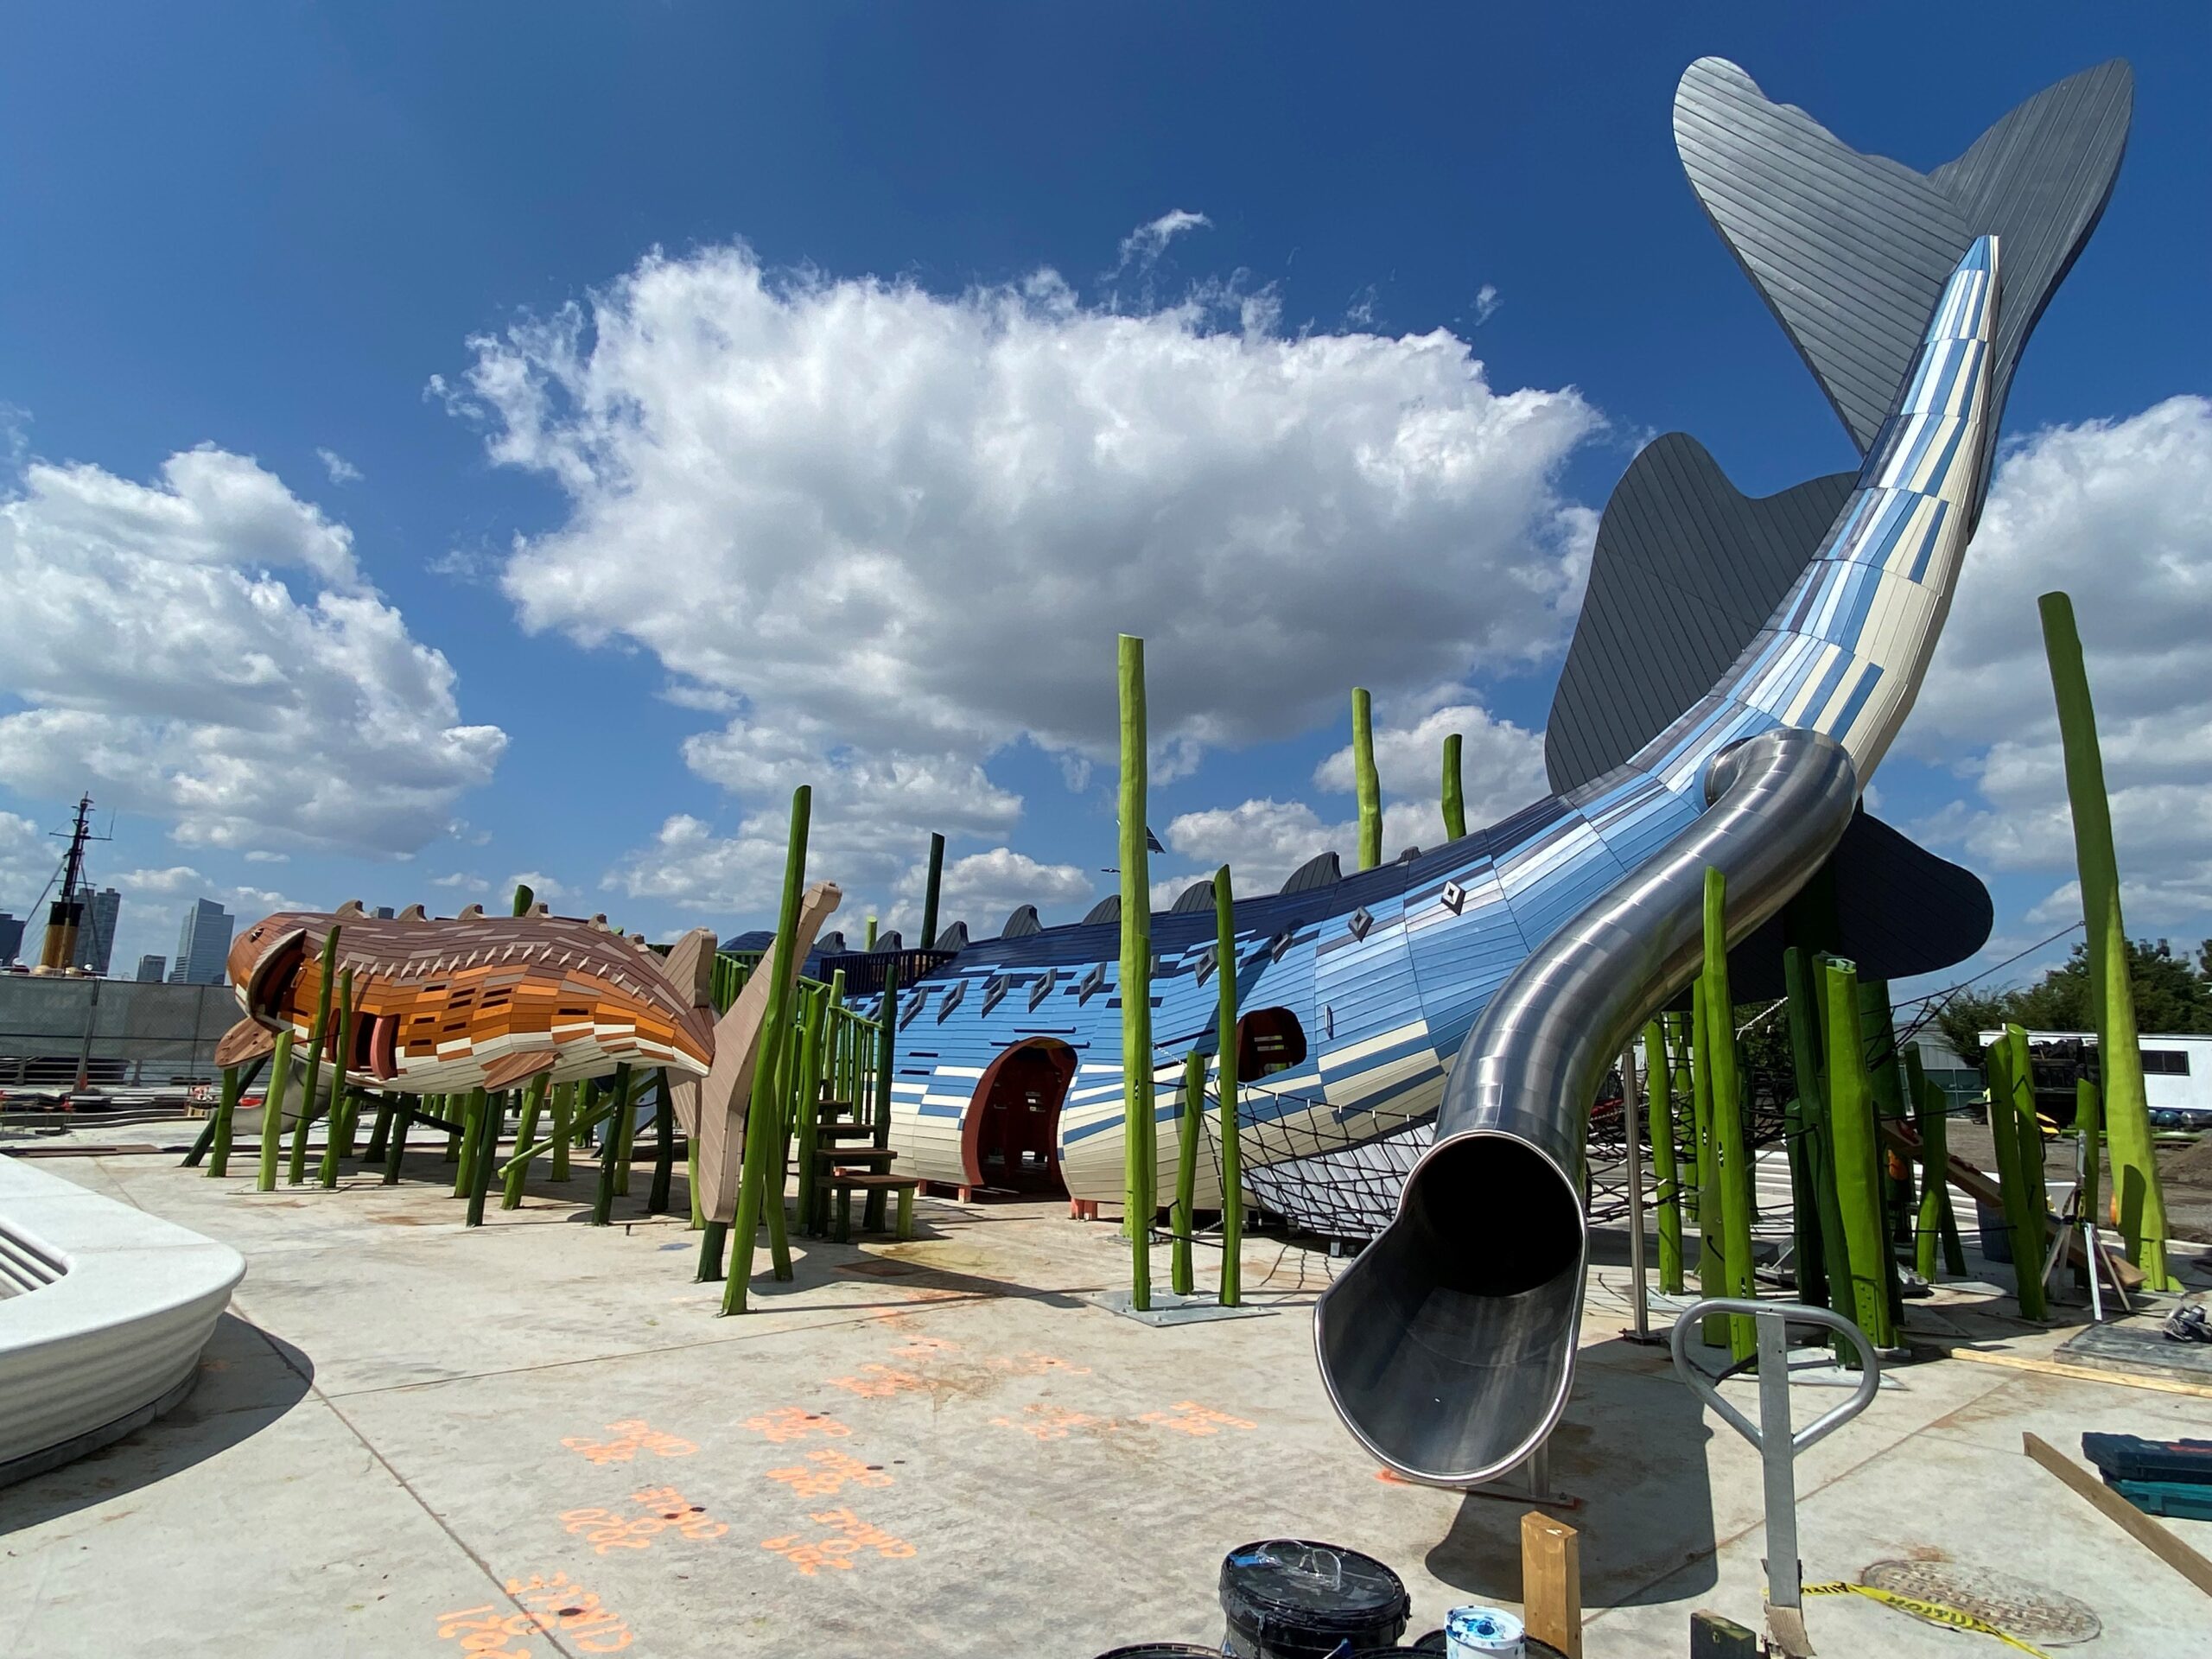 Playground slides designed to look like sturgeon under construction at the Pier 26 Science Play Area